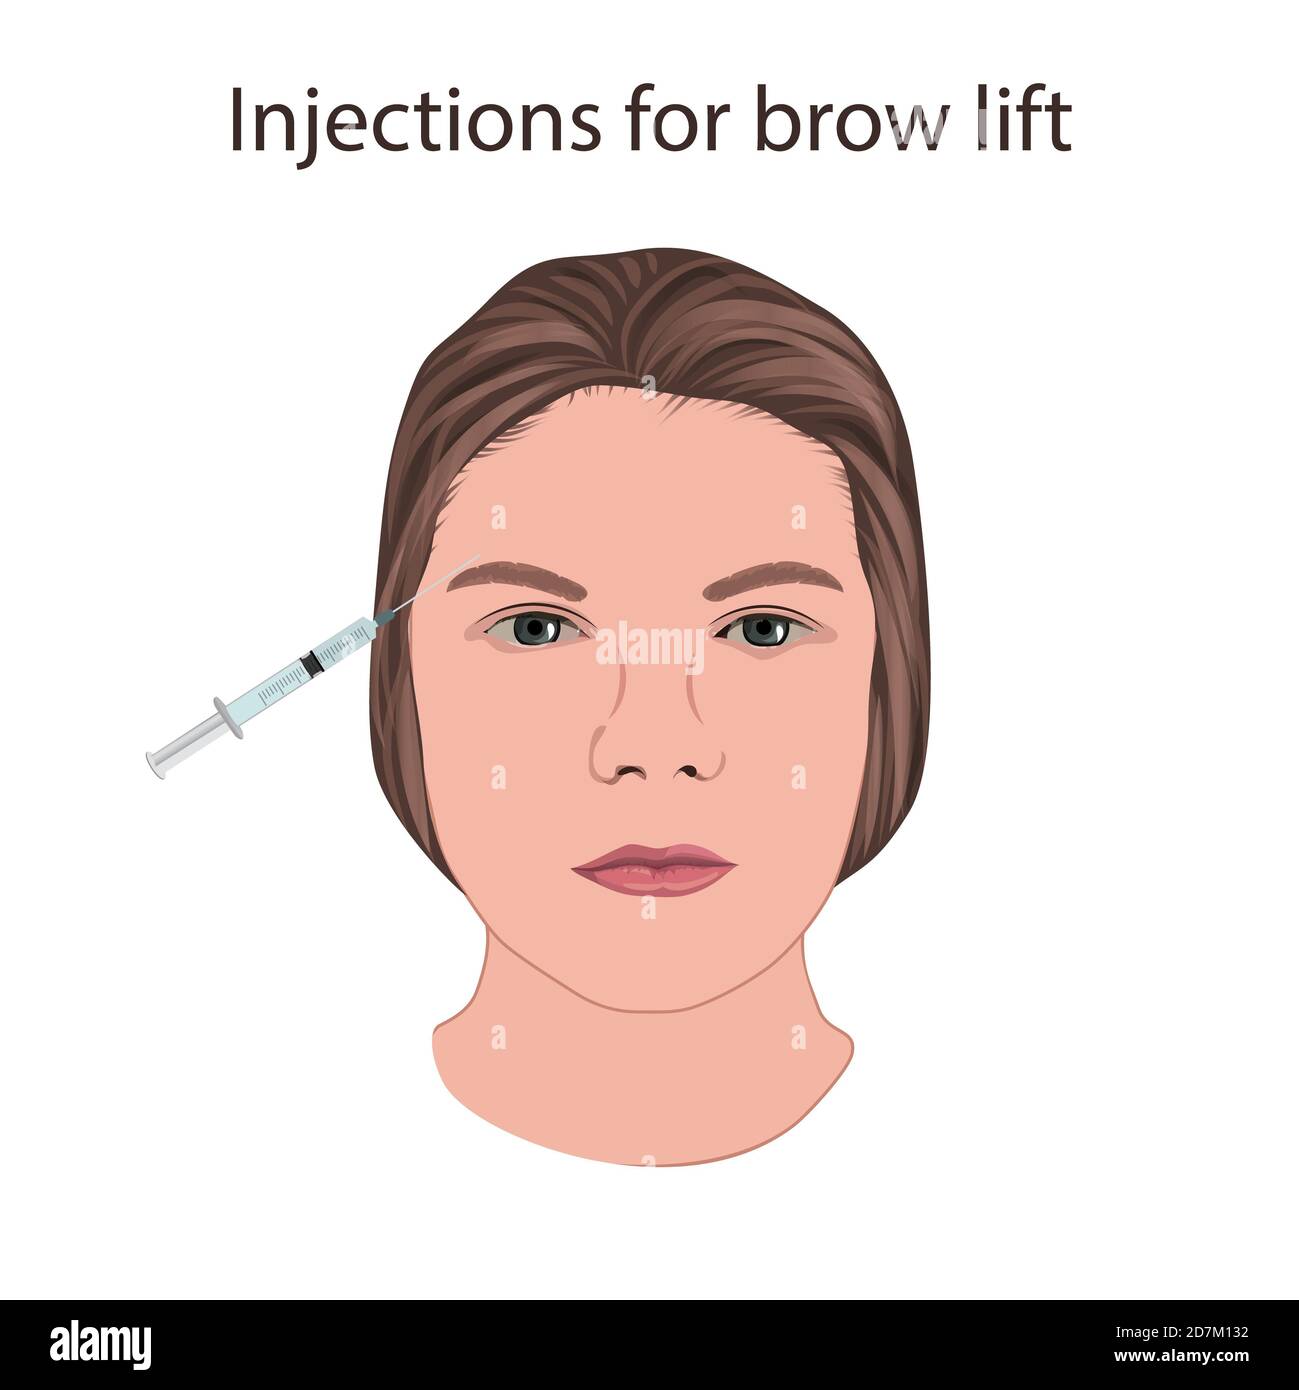 Injections for brow lift, illustration. Stock Photo